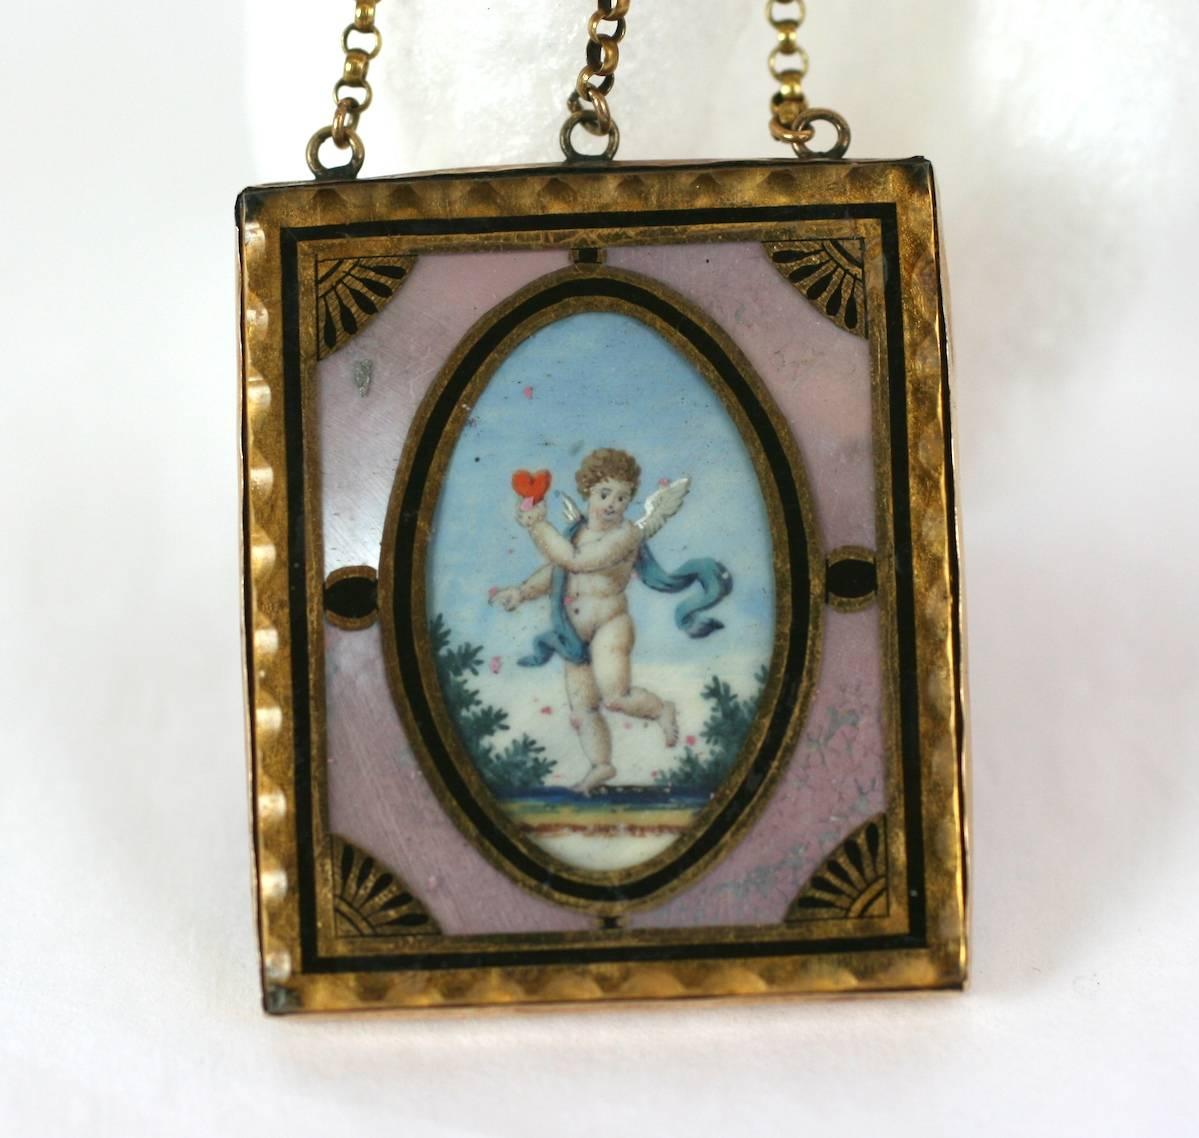 Charming and rare 18th Century Love Token Pendant,  hand painted watercolor of angel carrying a red heart, set under glass in a verre eglomise frame. The beautifully detailed miniature is set into iridescent mother of pearl and has a silk fabric